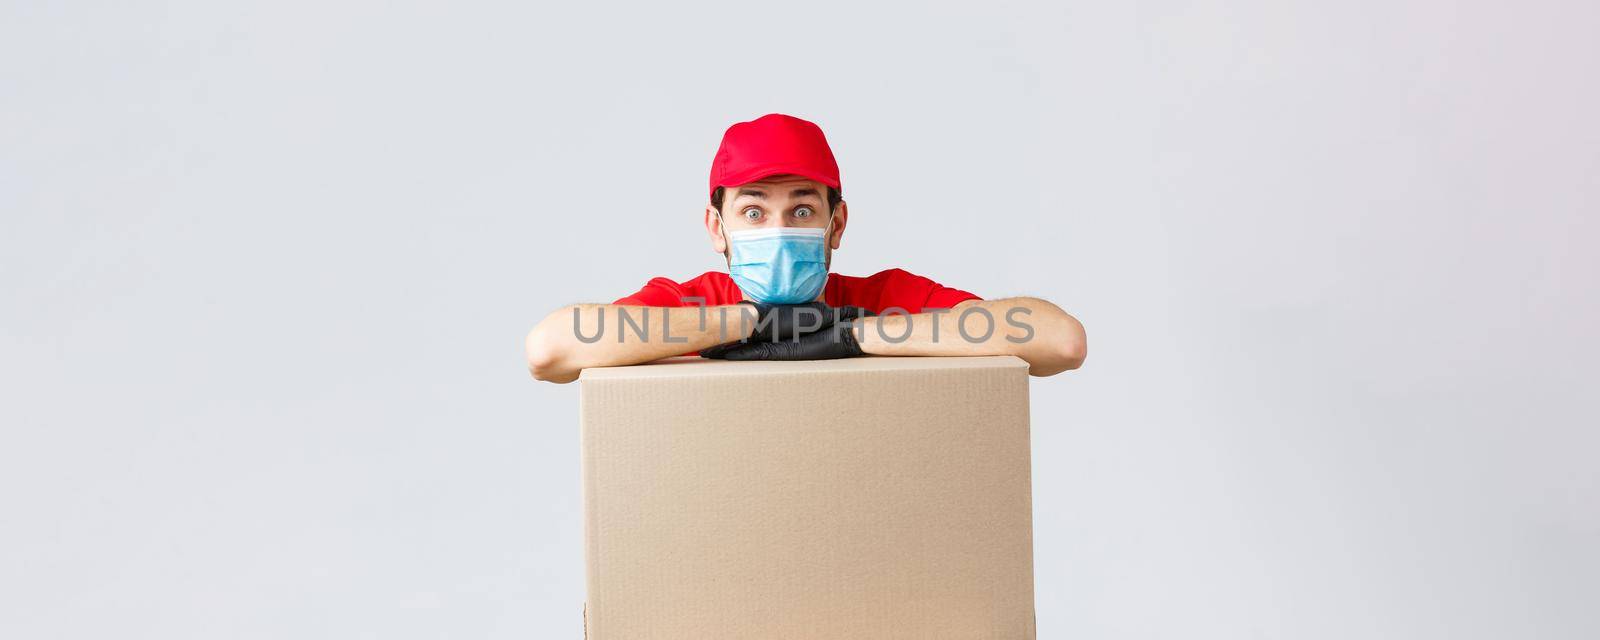 Packages and parcels delivery, covid-19 quarantine and transfer orders. Worried and confused courier in red uniform, gloves and face mask, lean on order box and look surprised camera.